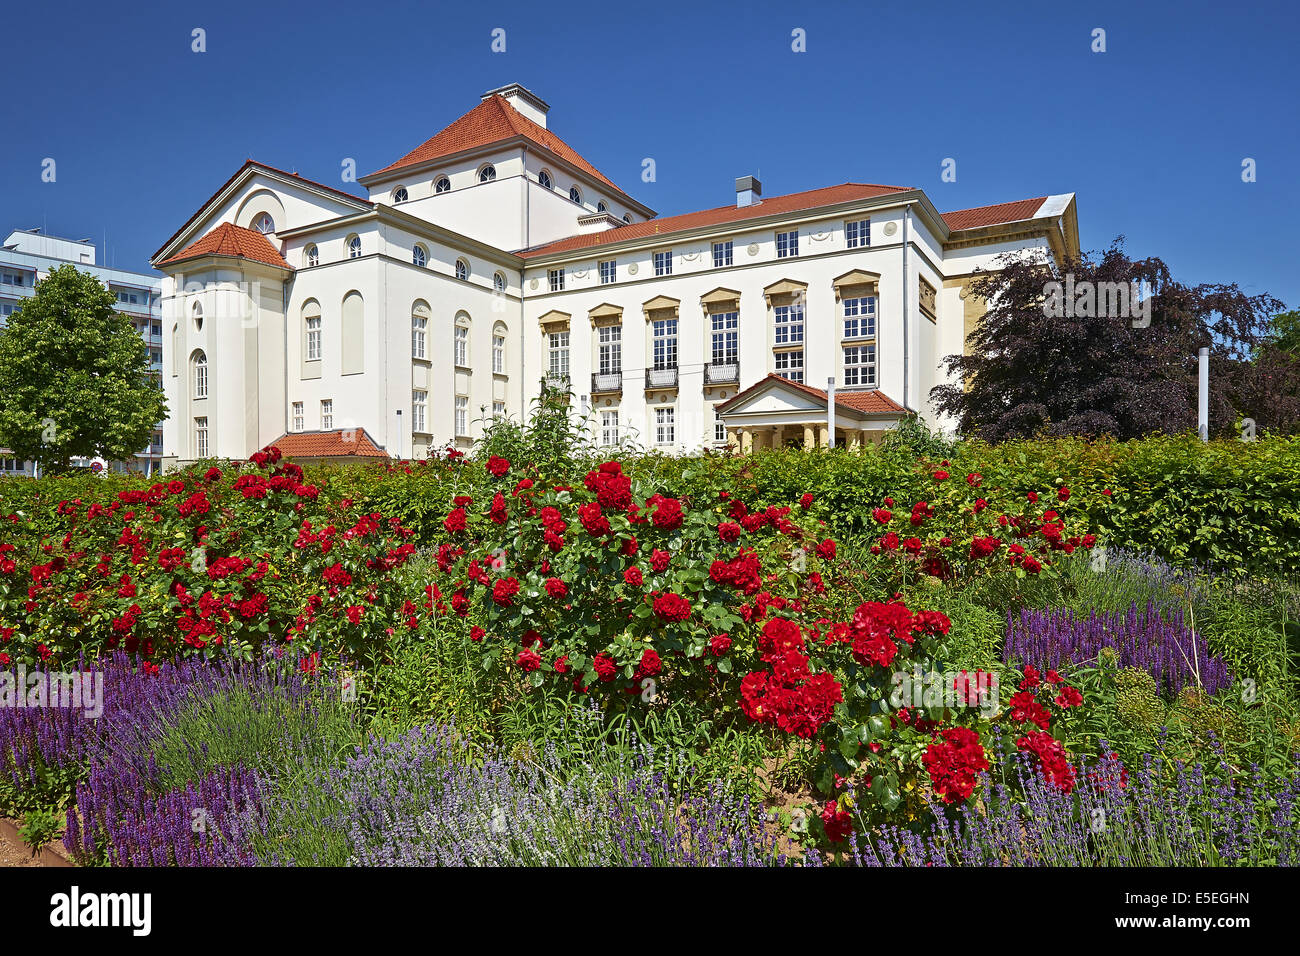 Theater in Nordhausen, Germany Stock Photo Alamy